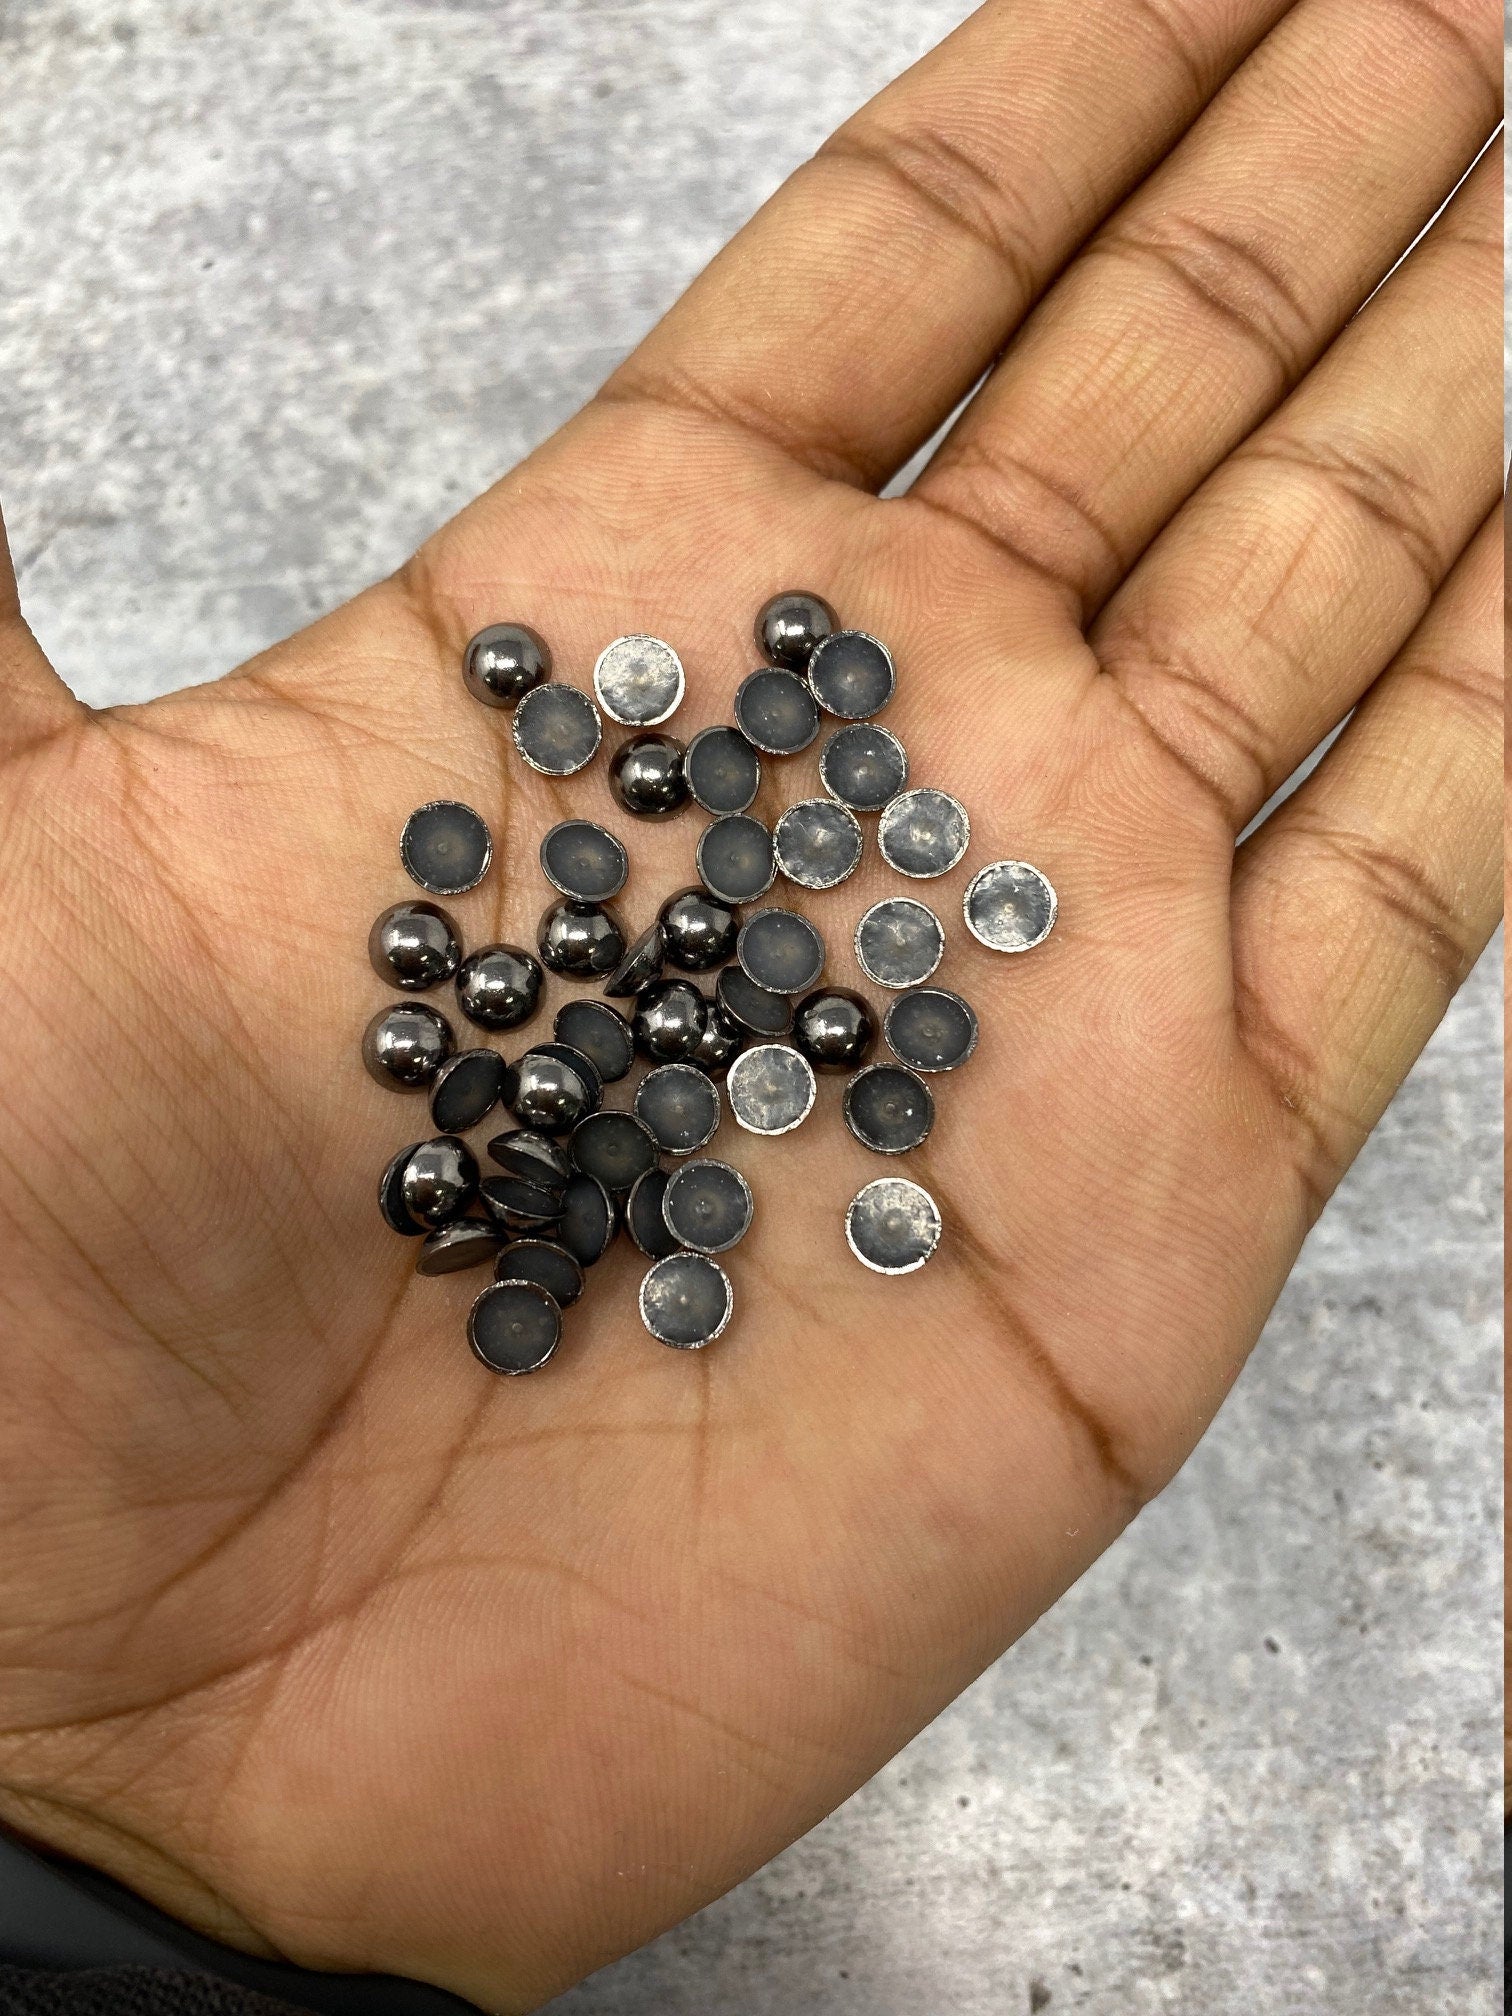 NEW, Hotfix Dome Studs, 100 Pcs, 7mm (Medium) CHROME, Great for Denim, Sweaters, Camo Jackets, Belts, Bags, Shoes, Crafts,+ MORE!